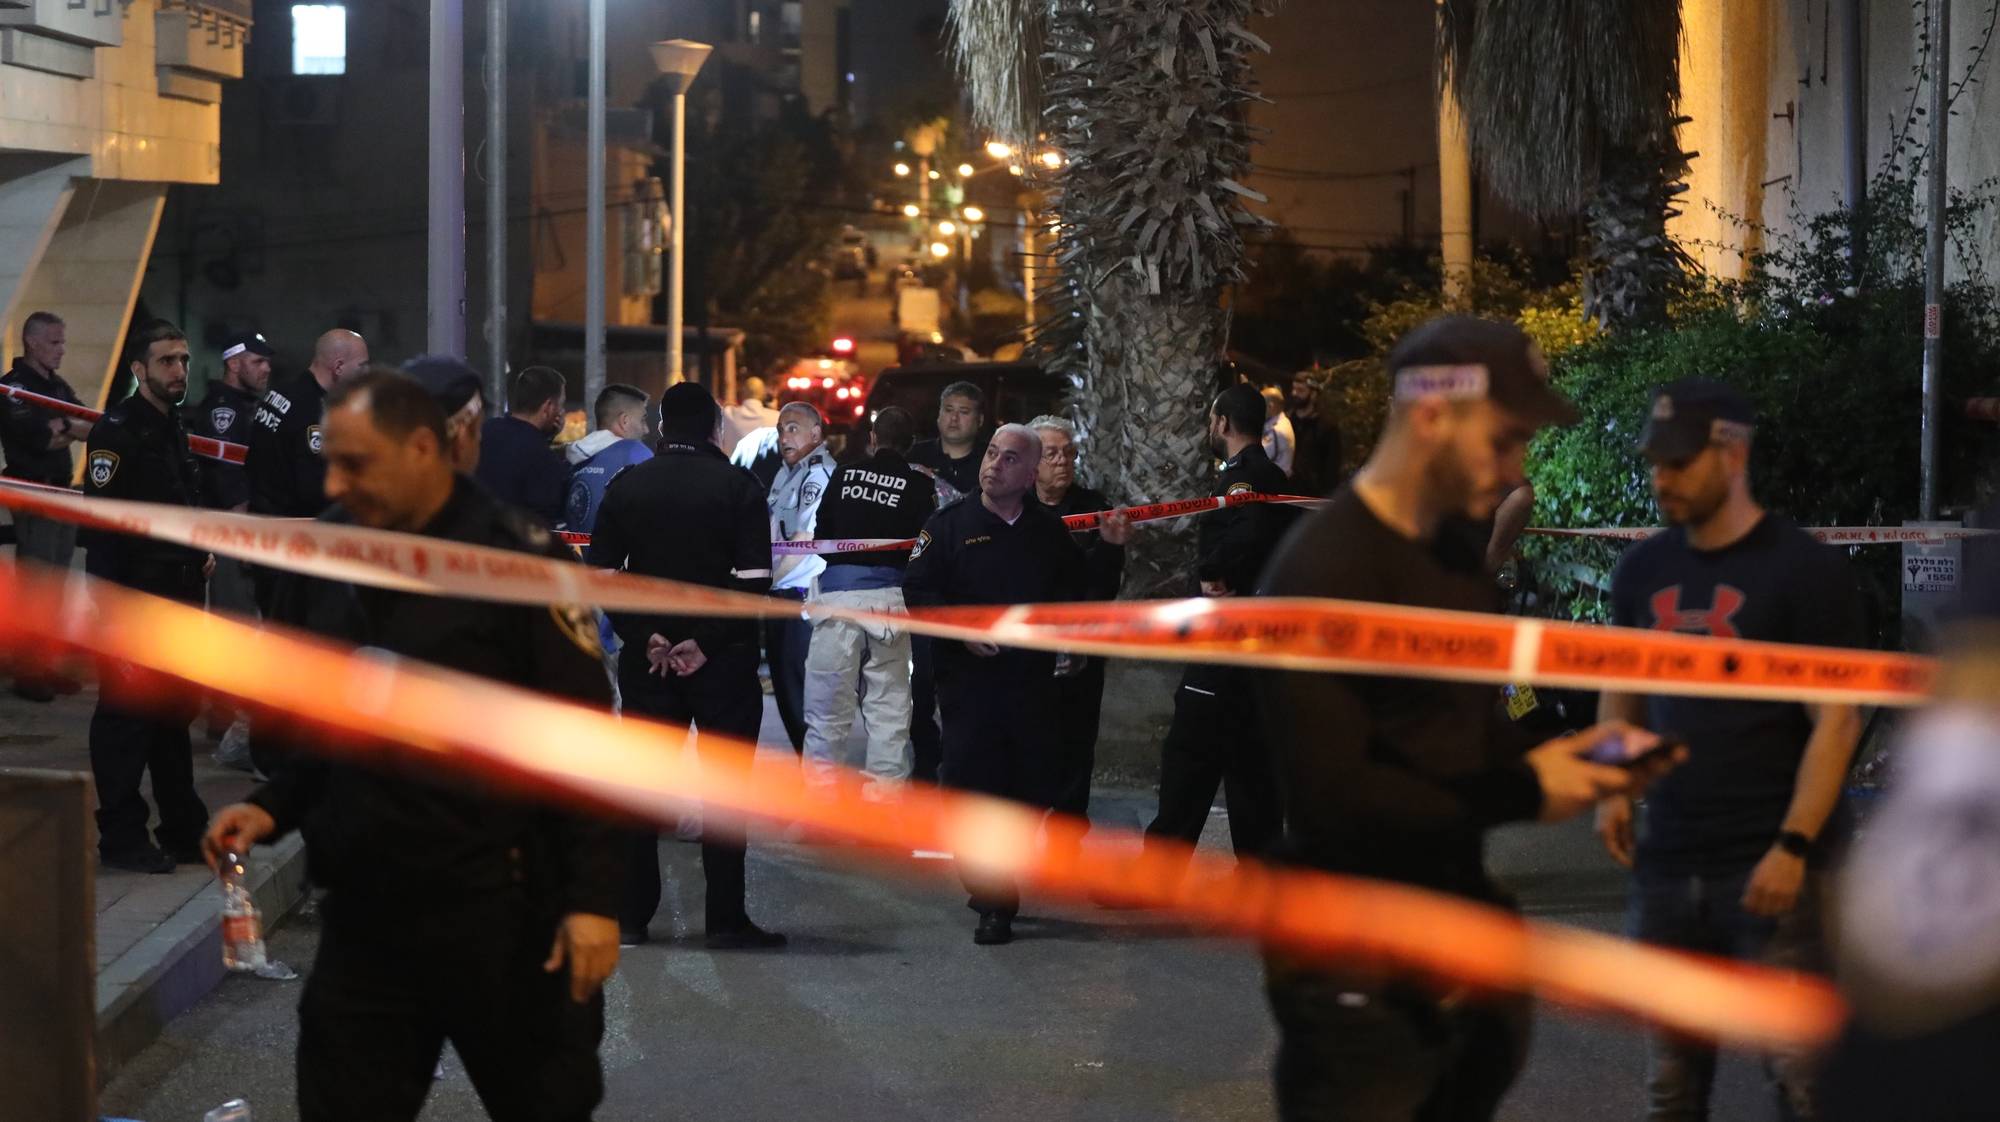 epa09858789 Israeli emergency personnel at the scene of attack in city of Bnei Brak, near Tel Aviv, Israel, 29 March 2022. According to emergency services, at least five Israelis where killed in a shooting attack by Israeli Arab gunmen.  EPA/ABIR SULTAN